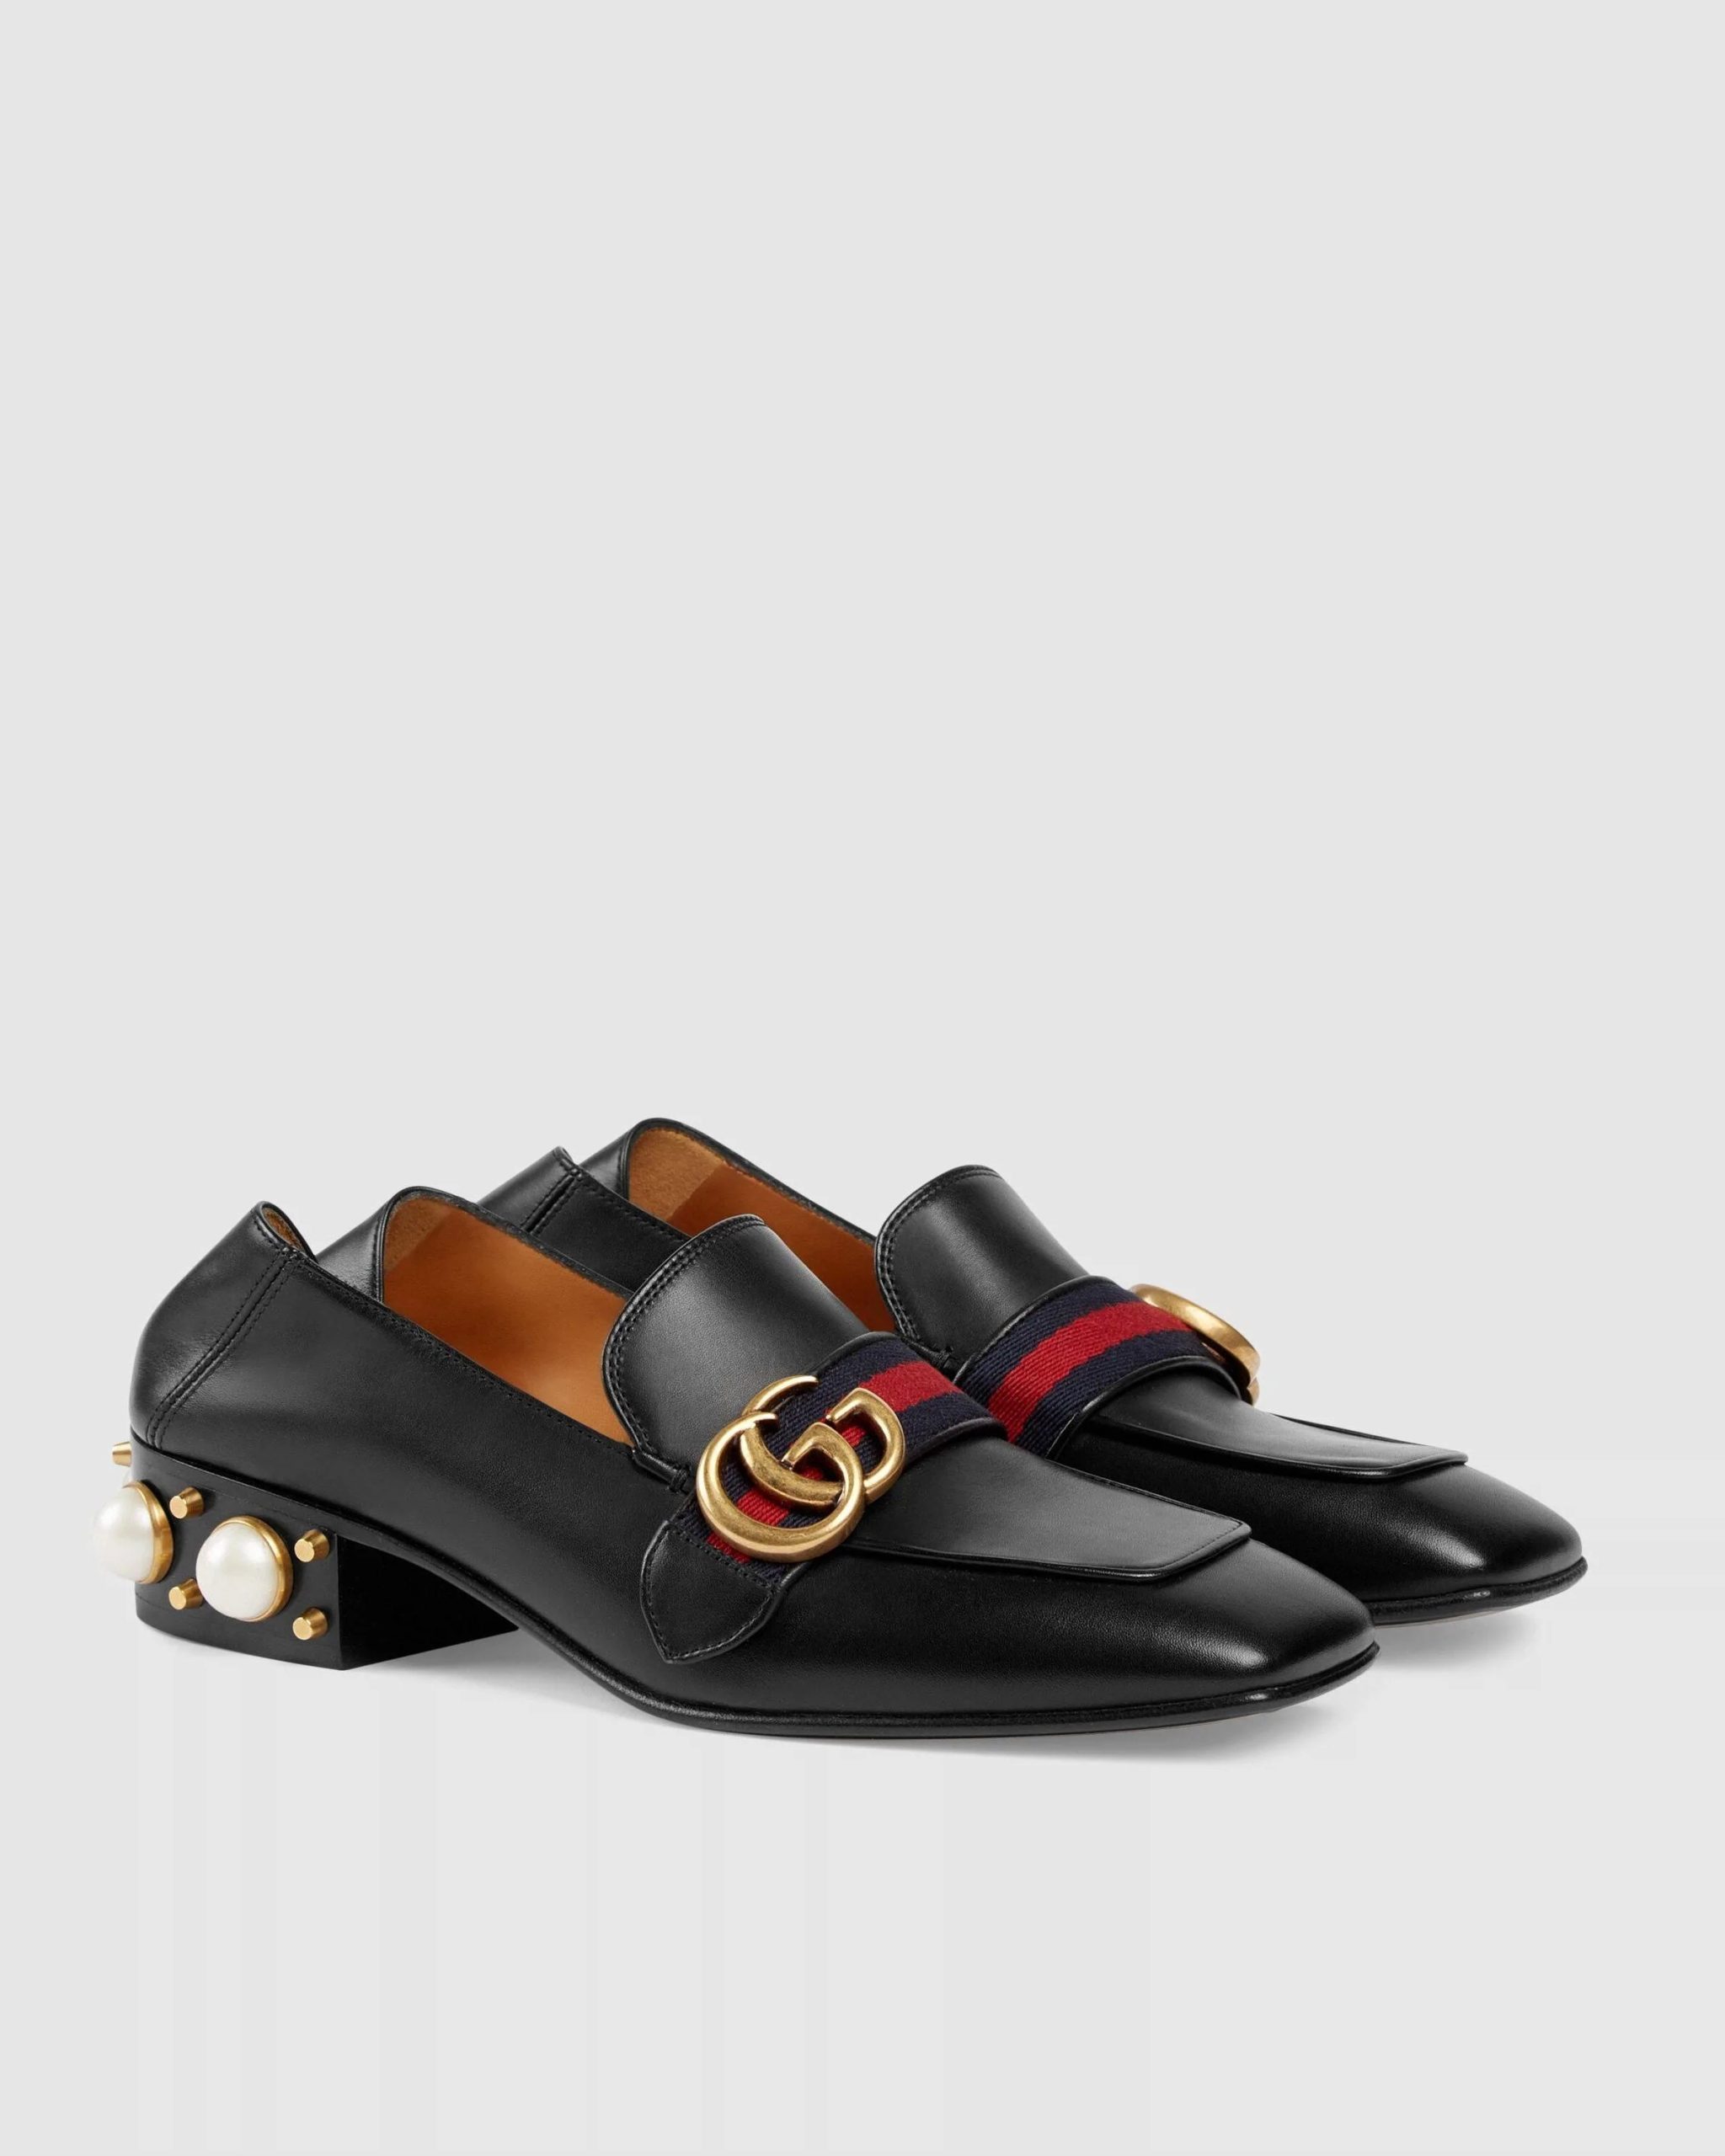 Gucci Leather Mid-Heel Loafer, Black